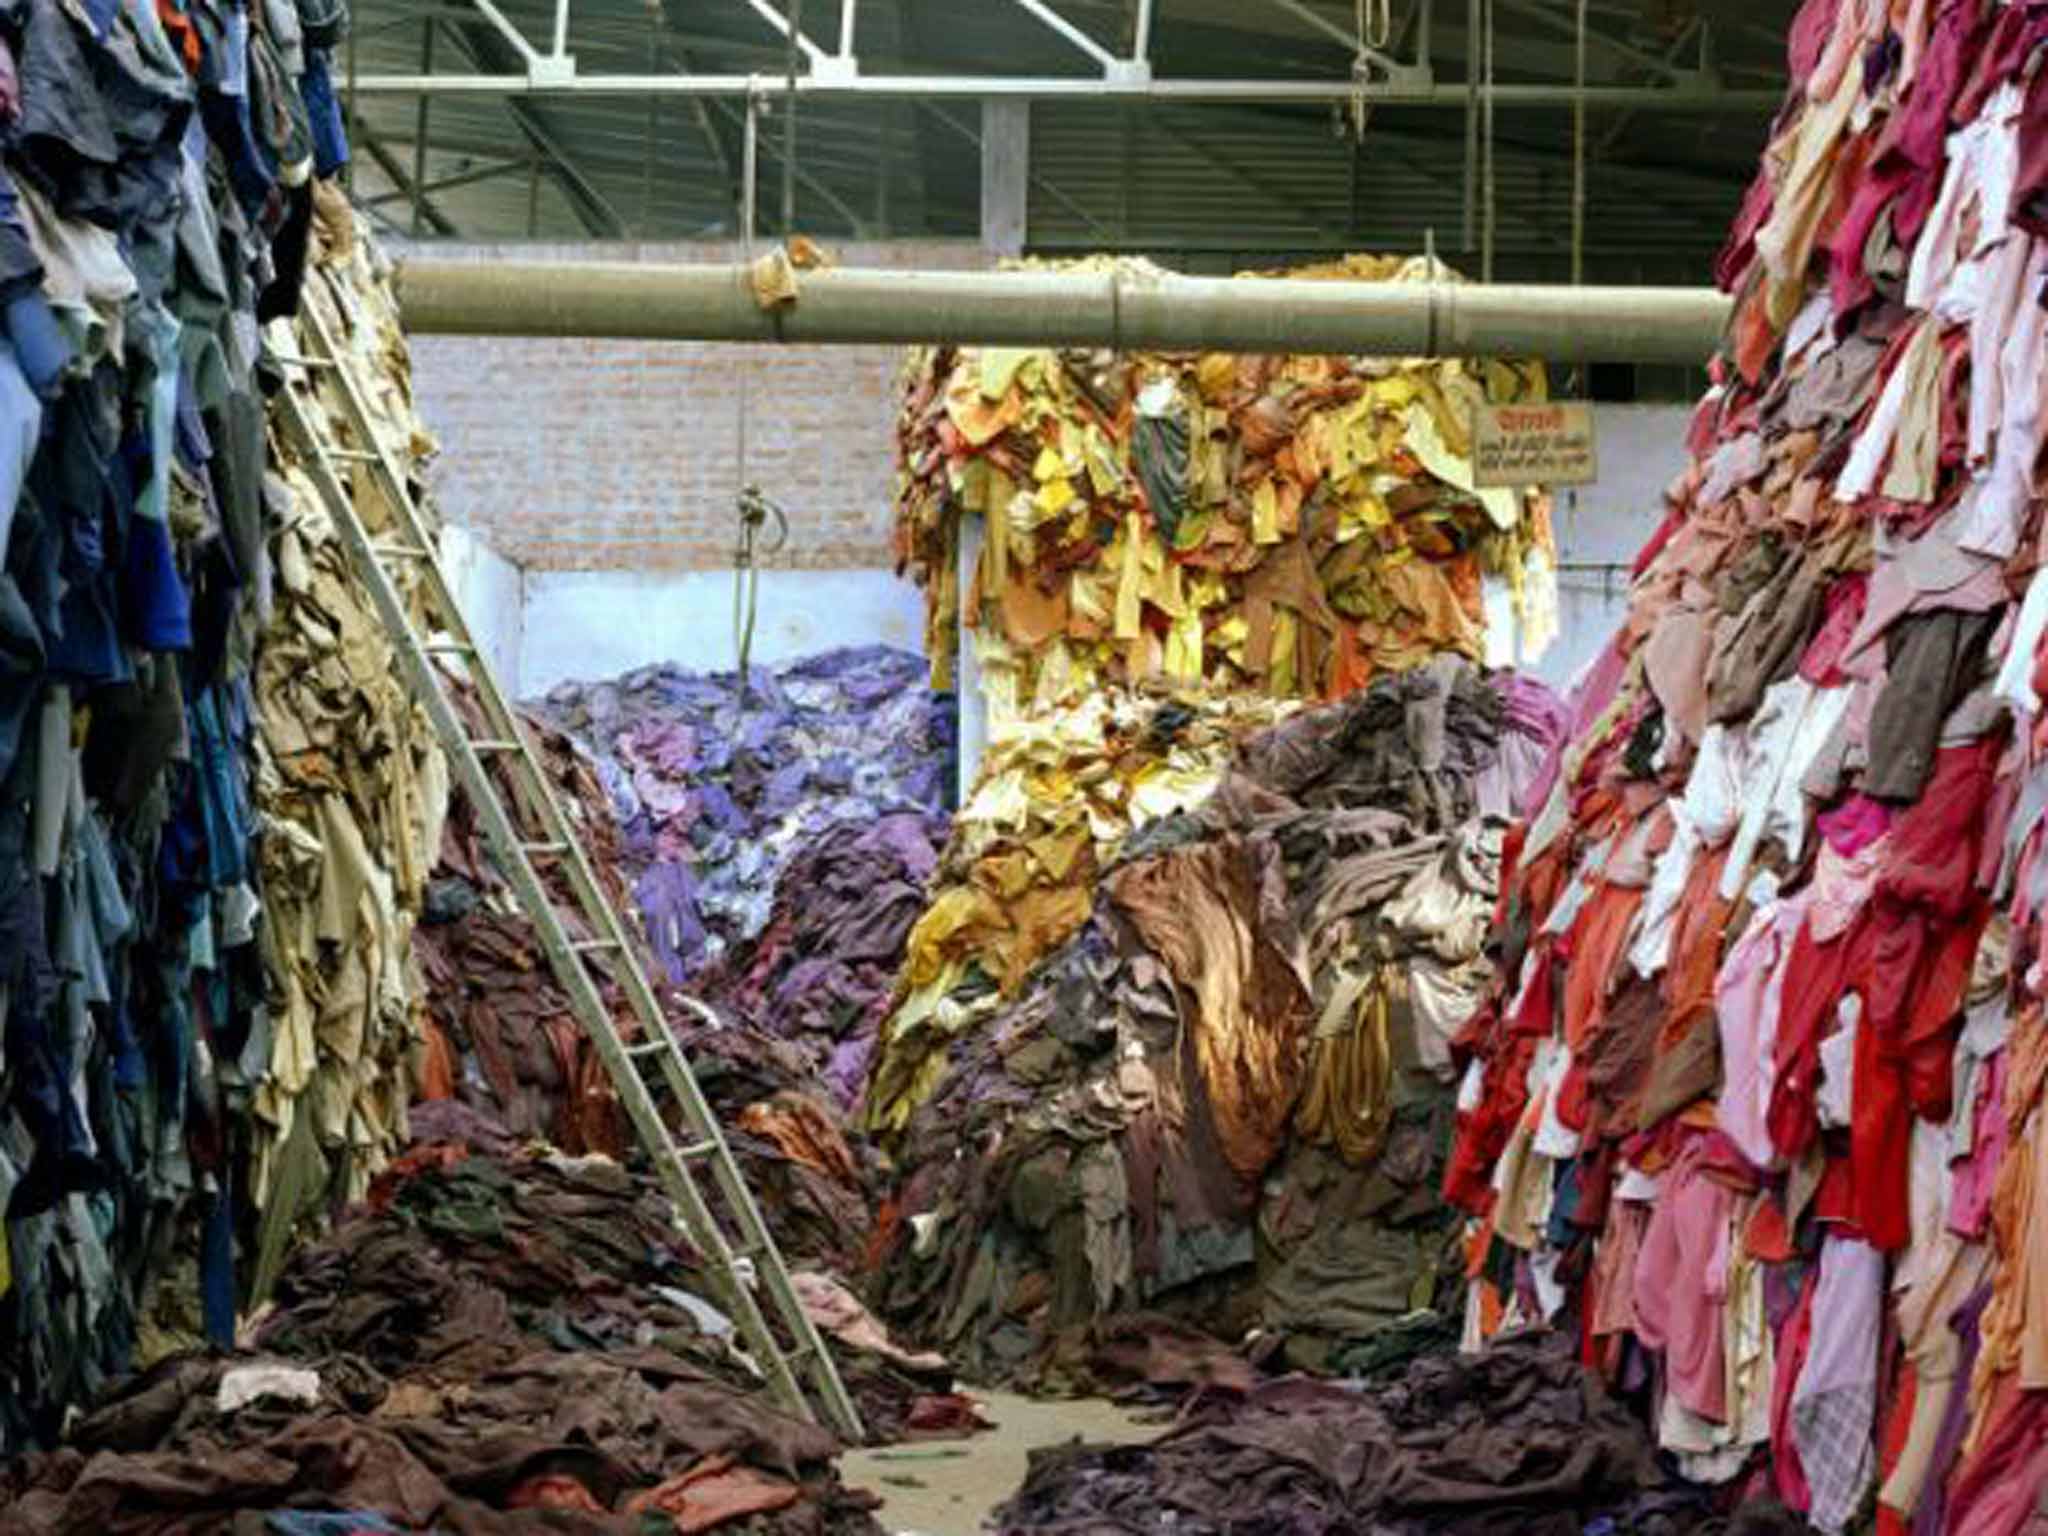 No sweat: clothes are piled up in a warehouse in India